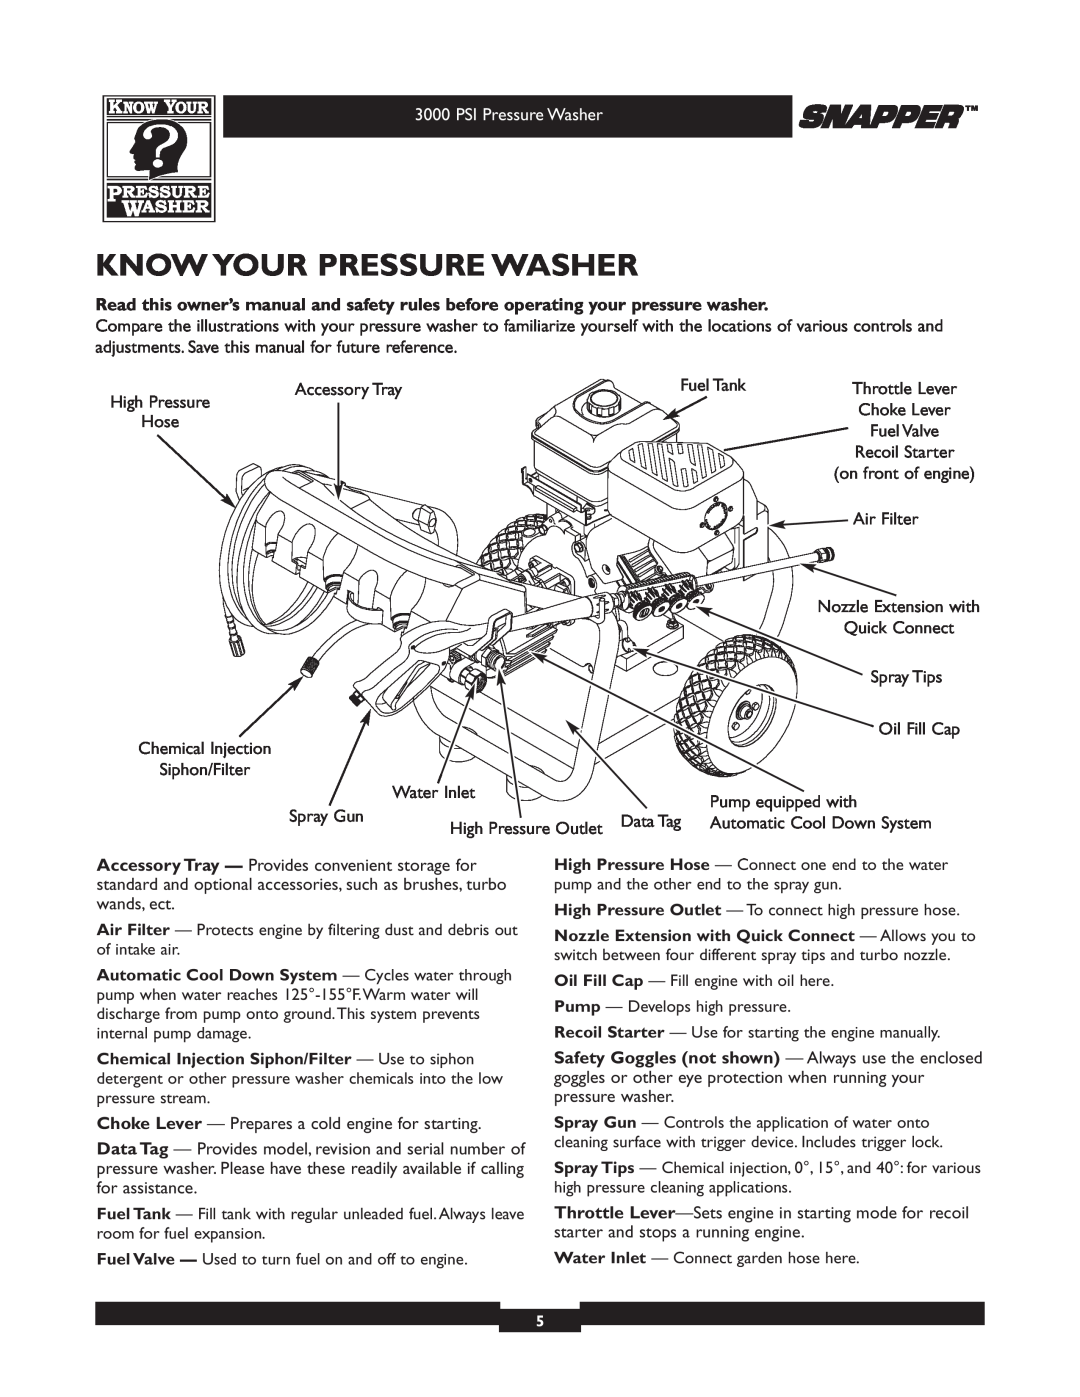 Snapper 020231 owner manual Know Your Pressure Washer, PSI Pressure Washer 